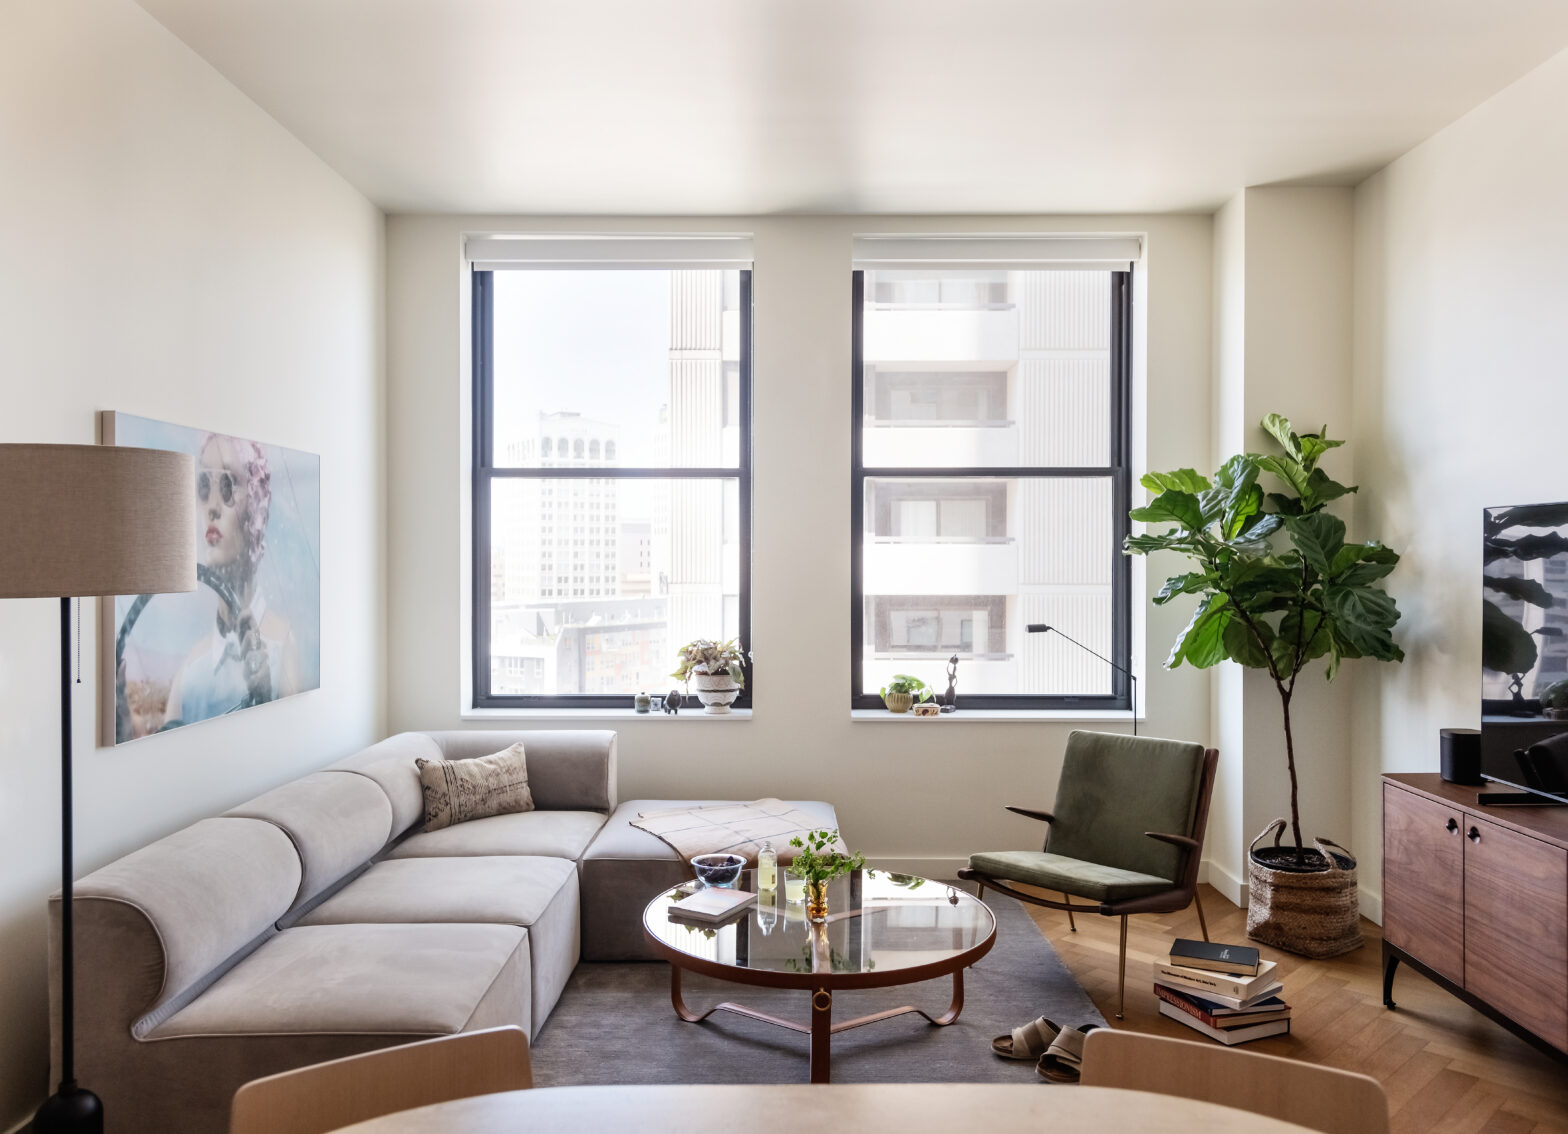 This New Apartment Style Hotel Is Perfect For Digital Nomads Visiting The Motor City